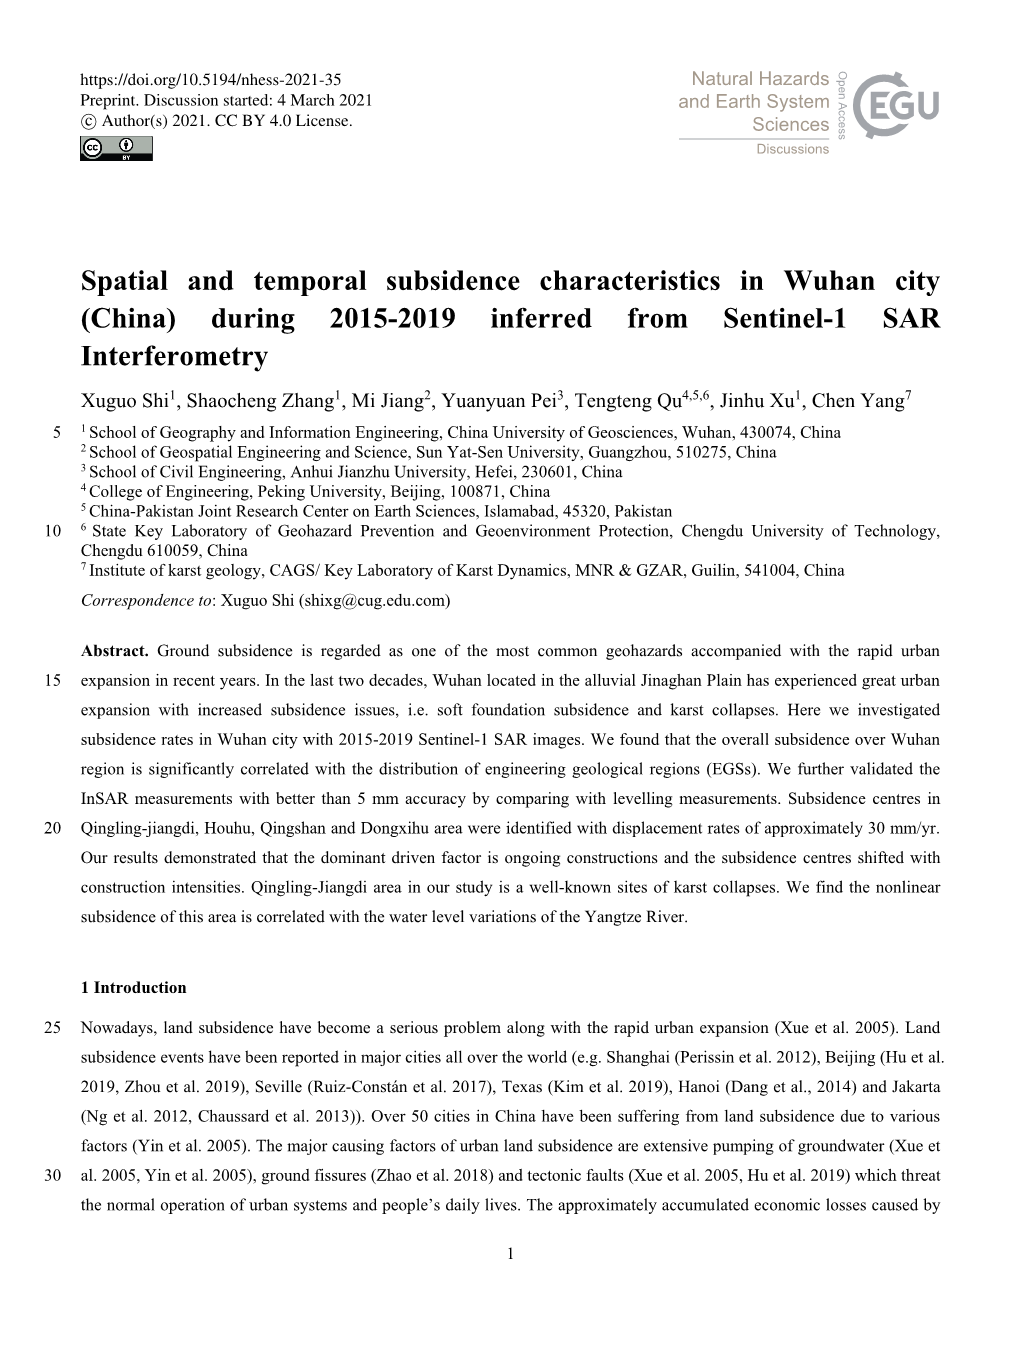 Spatial and Temporal Subsidence Characteristics in Wuhan City (China)